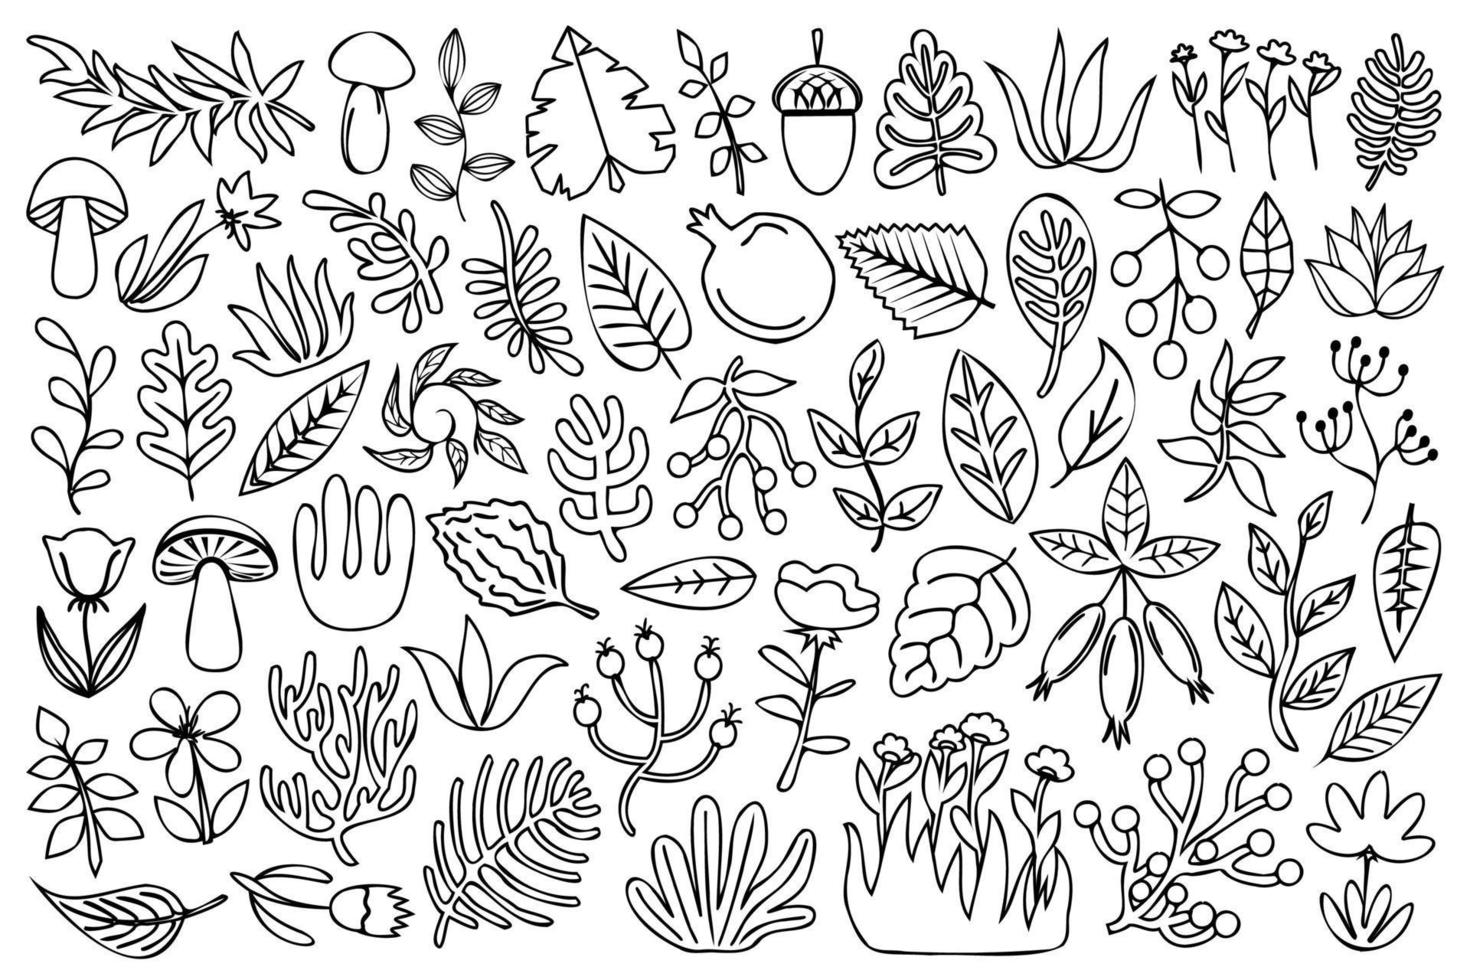 Line art natural design elements collection. Decorative nature design elements set. Outline grass, mushrooms, plants, flowers, leaves, berries and other wild natural elements. vector